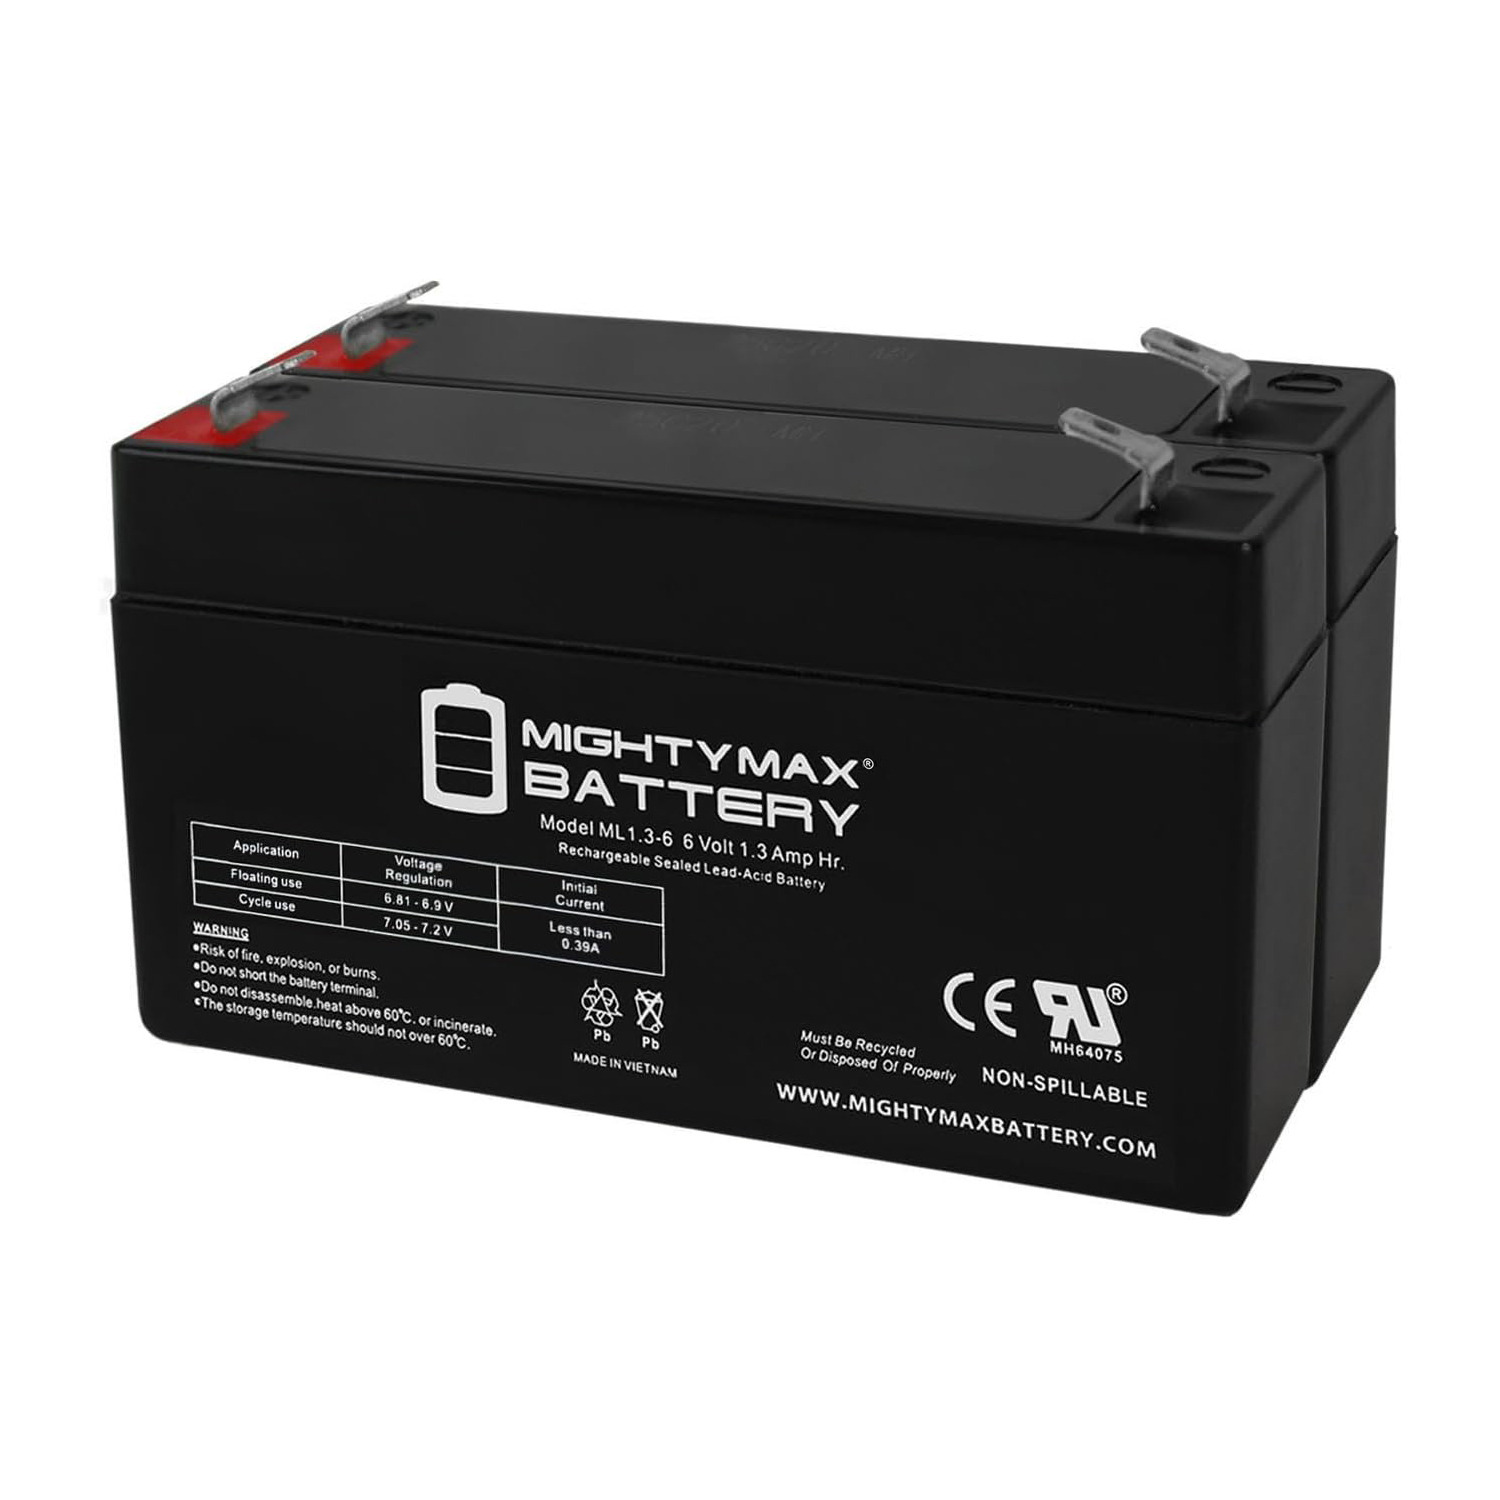 6V 1.3Ah SLA Replacement Battery for Life Systems H101A - 2 Pack